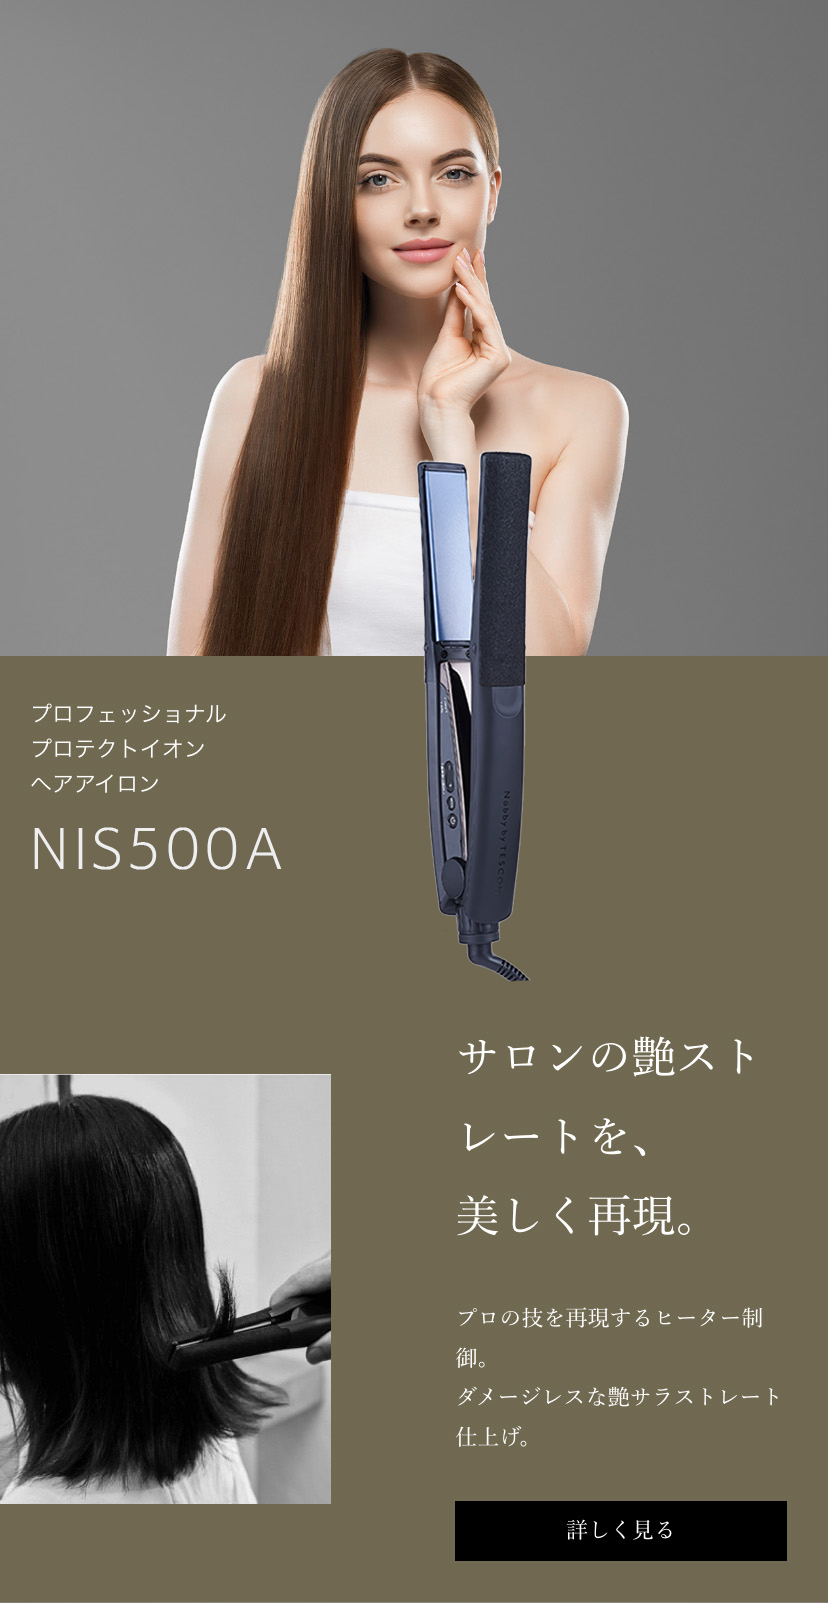 Nobby by TESCOMプロフェッショナル ヘアーアイロン NIS3001 - 通販